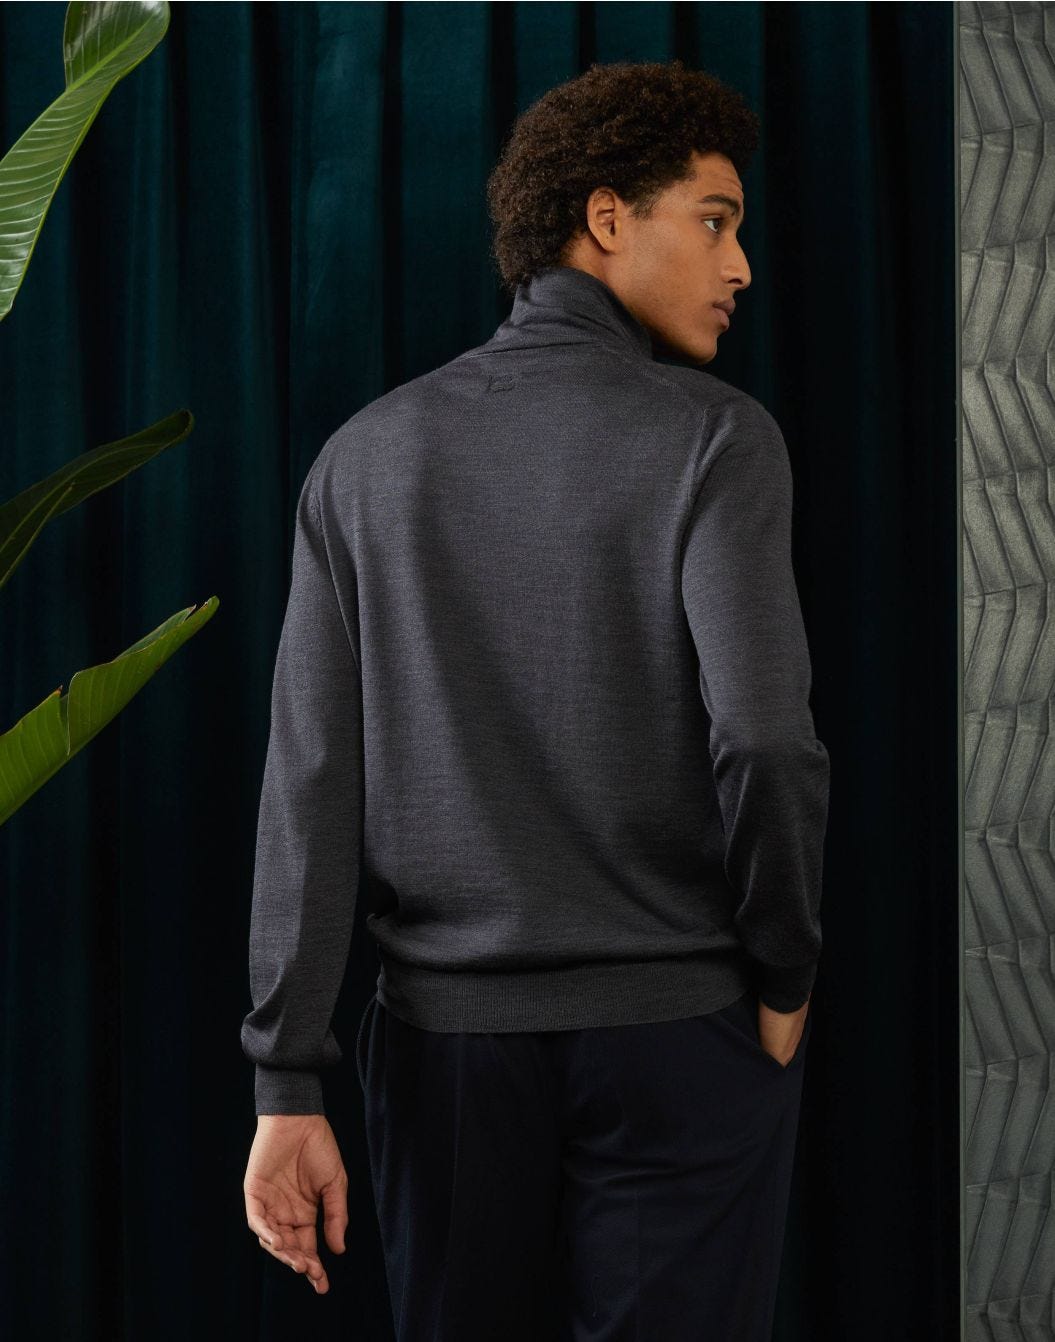 Mock neck sweater in grey total-easy-care worsted wool